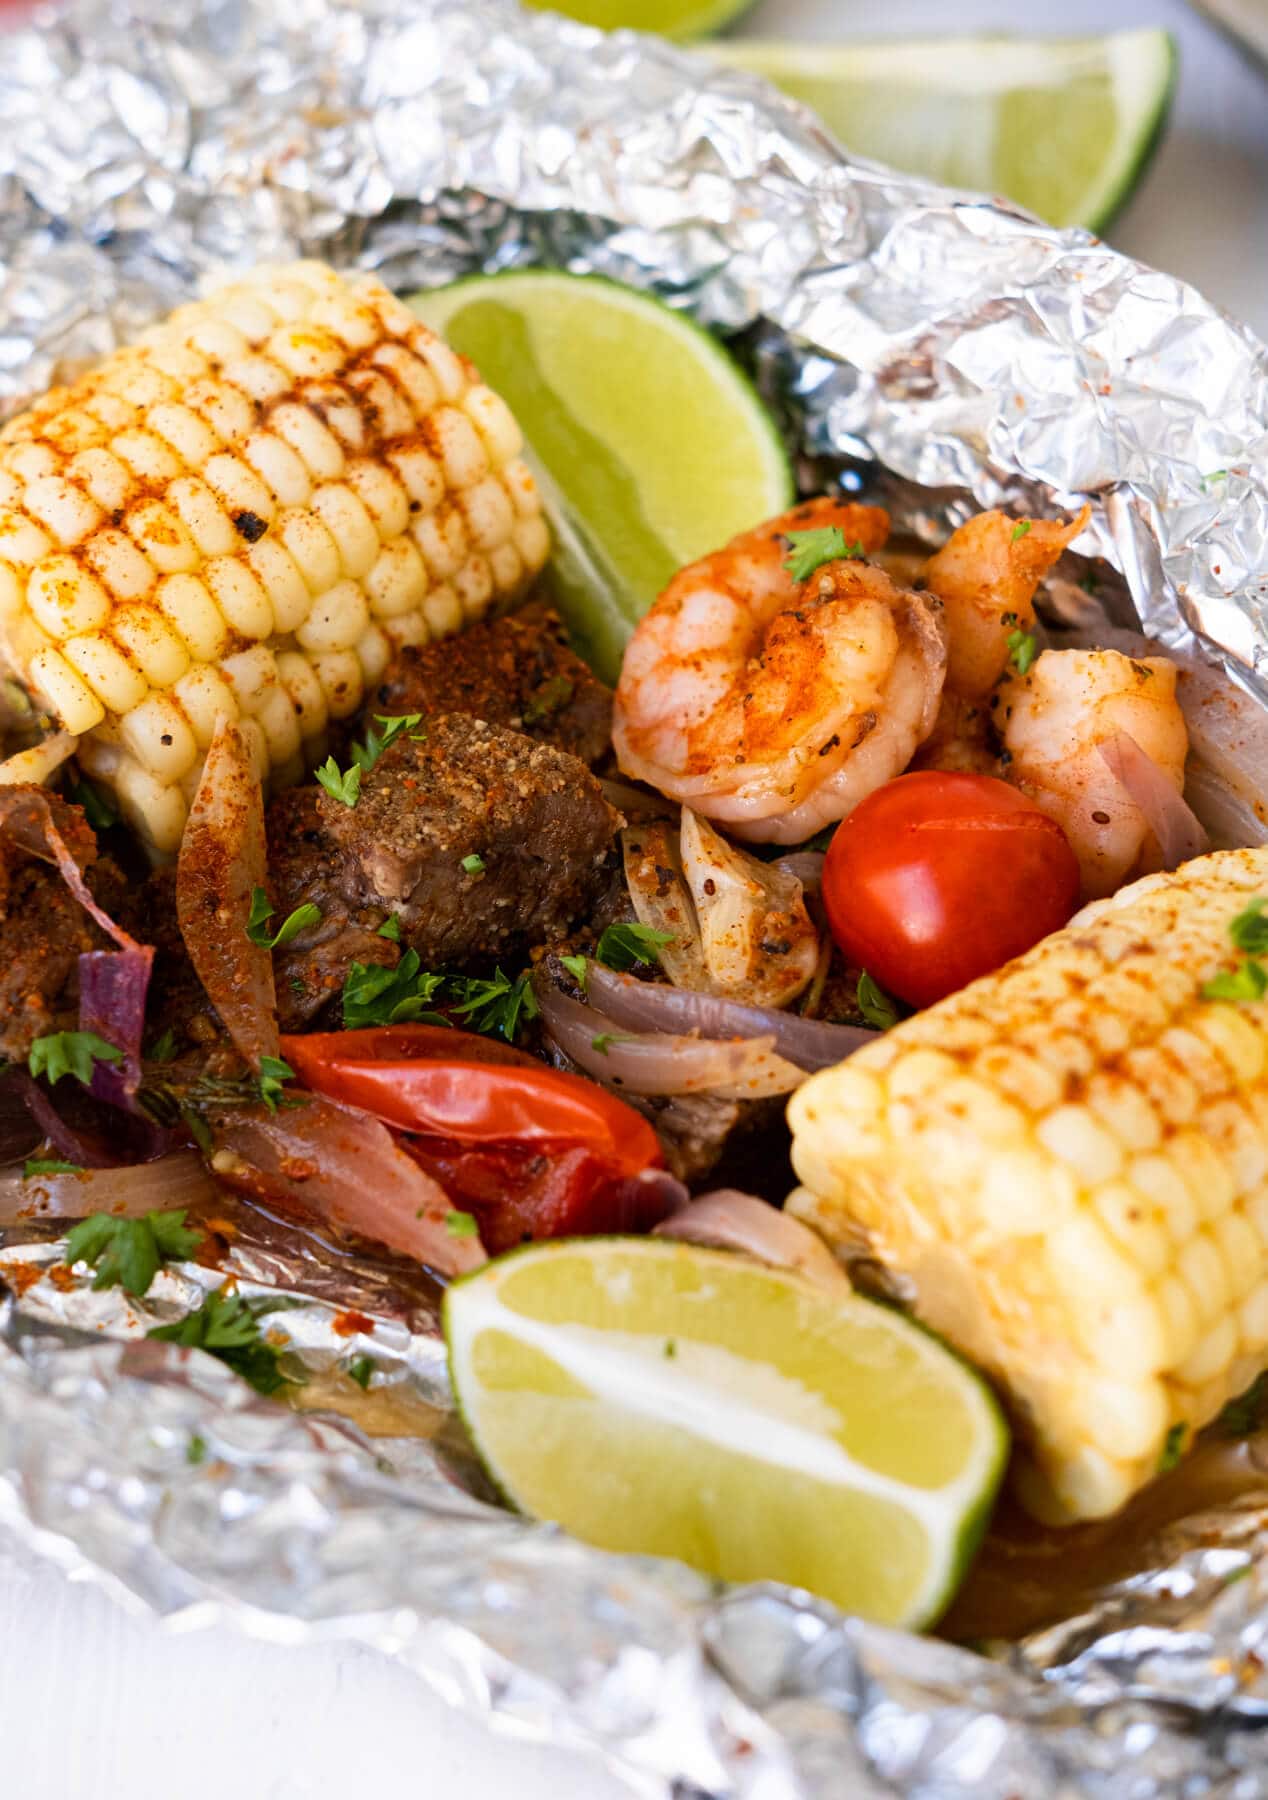 Grilled steak, shrimp, tomatoes, onion slices, corn with lime wedges and topped with chopped parsley on top.  